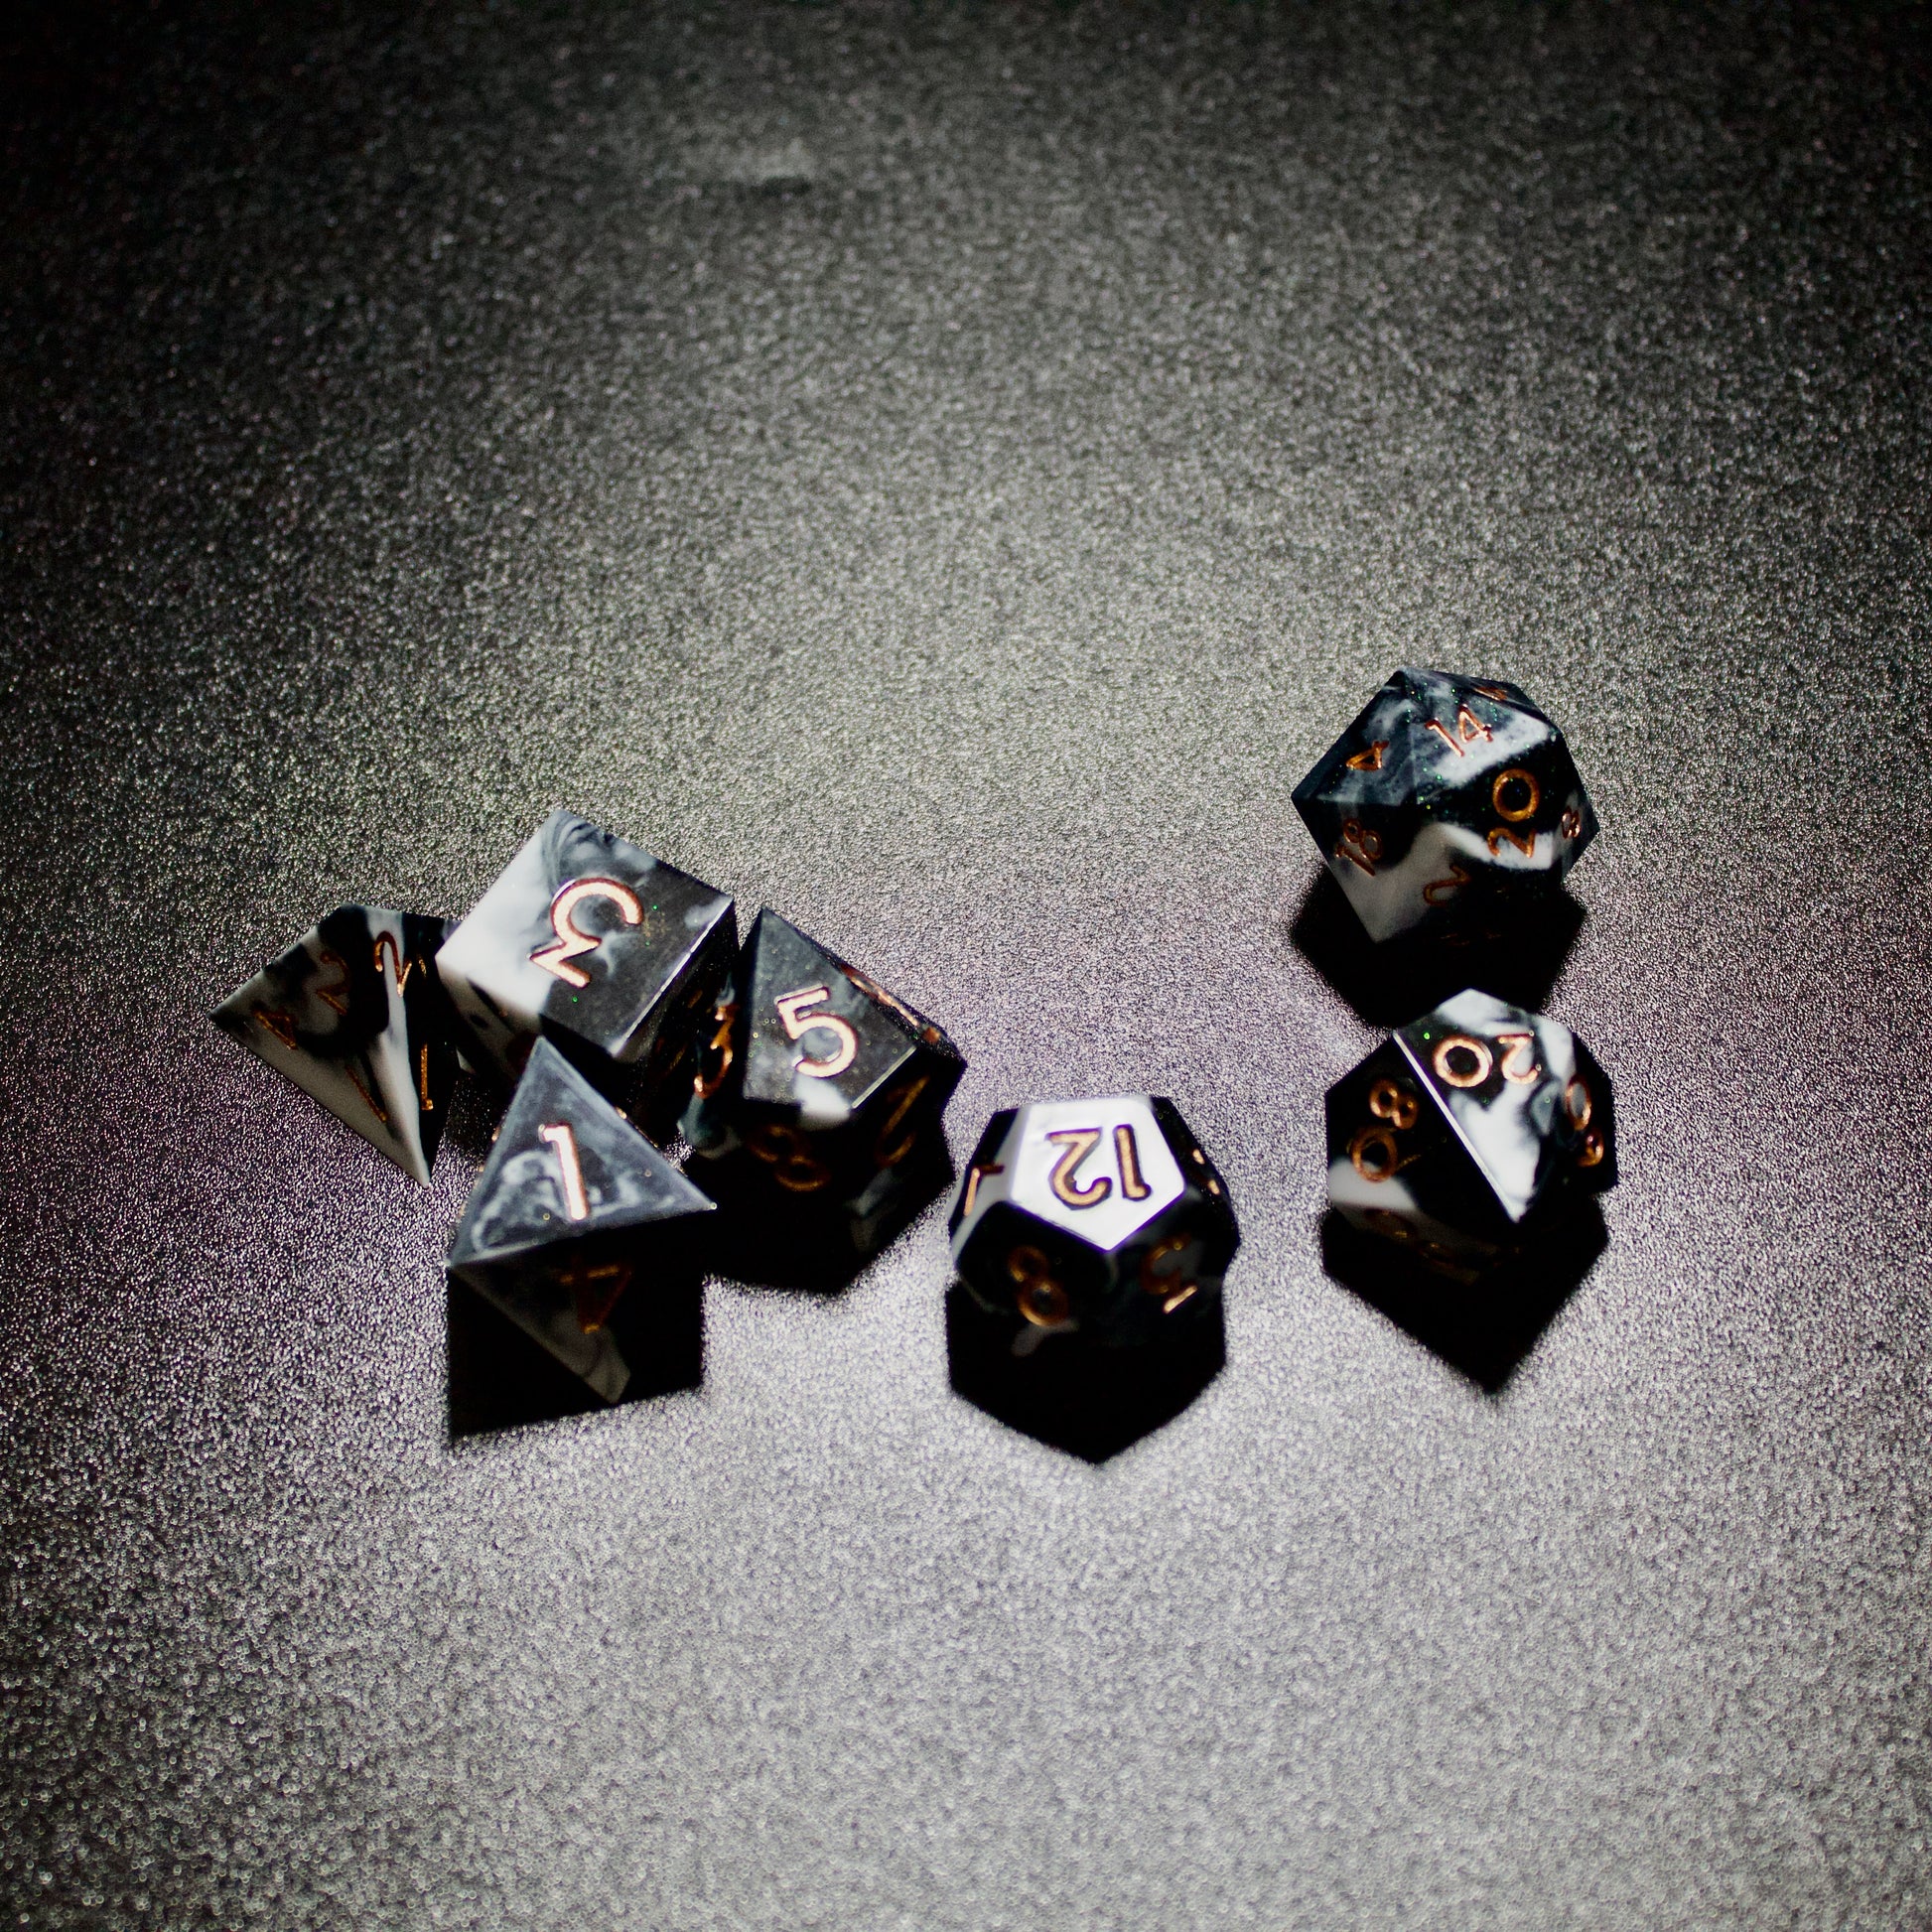 sharp edge black and white marble dnd, TTRPG role playing game dice sets, for dice goblins and critters